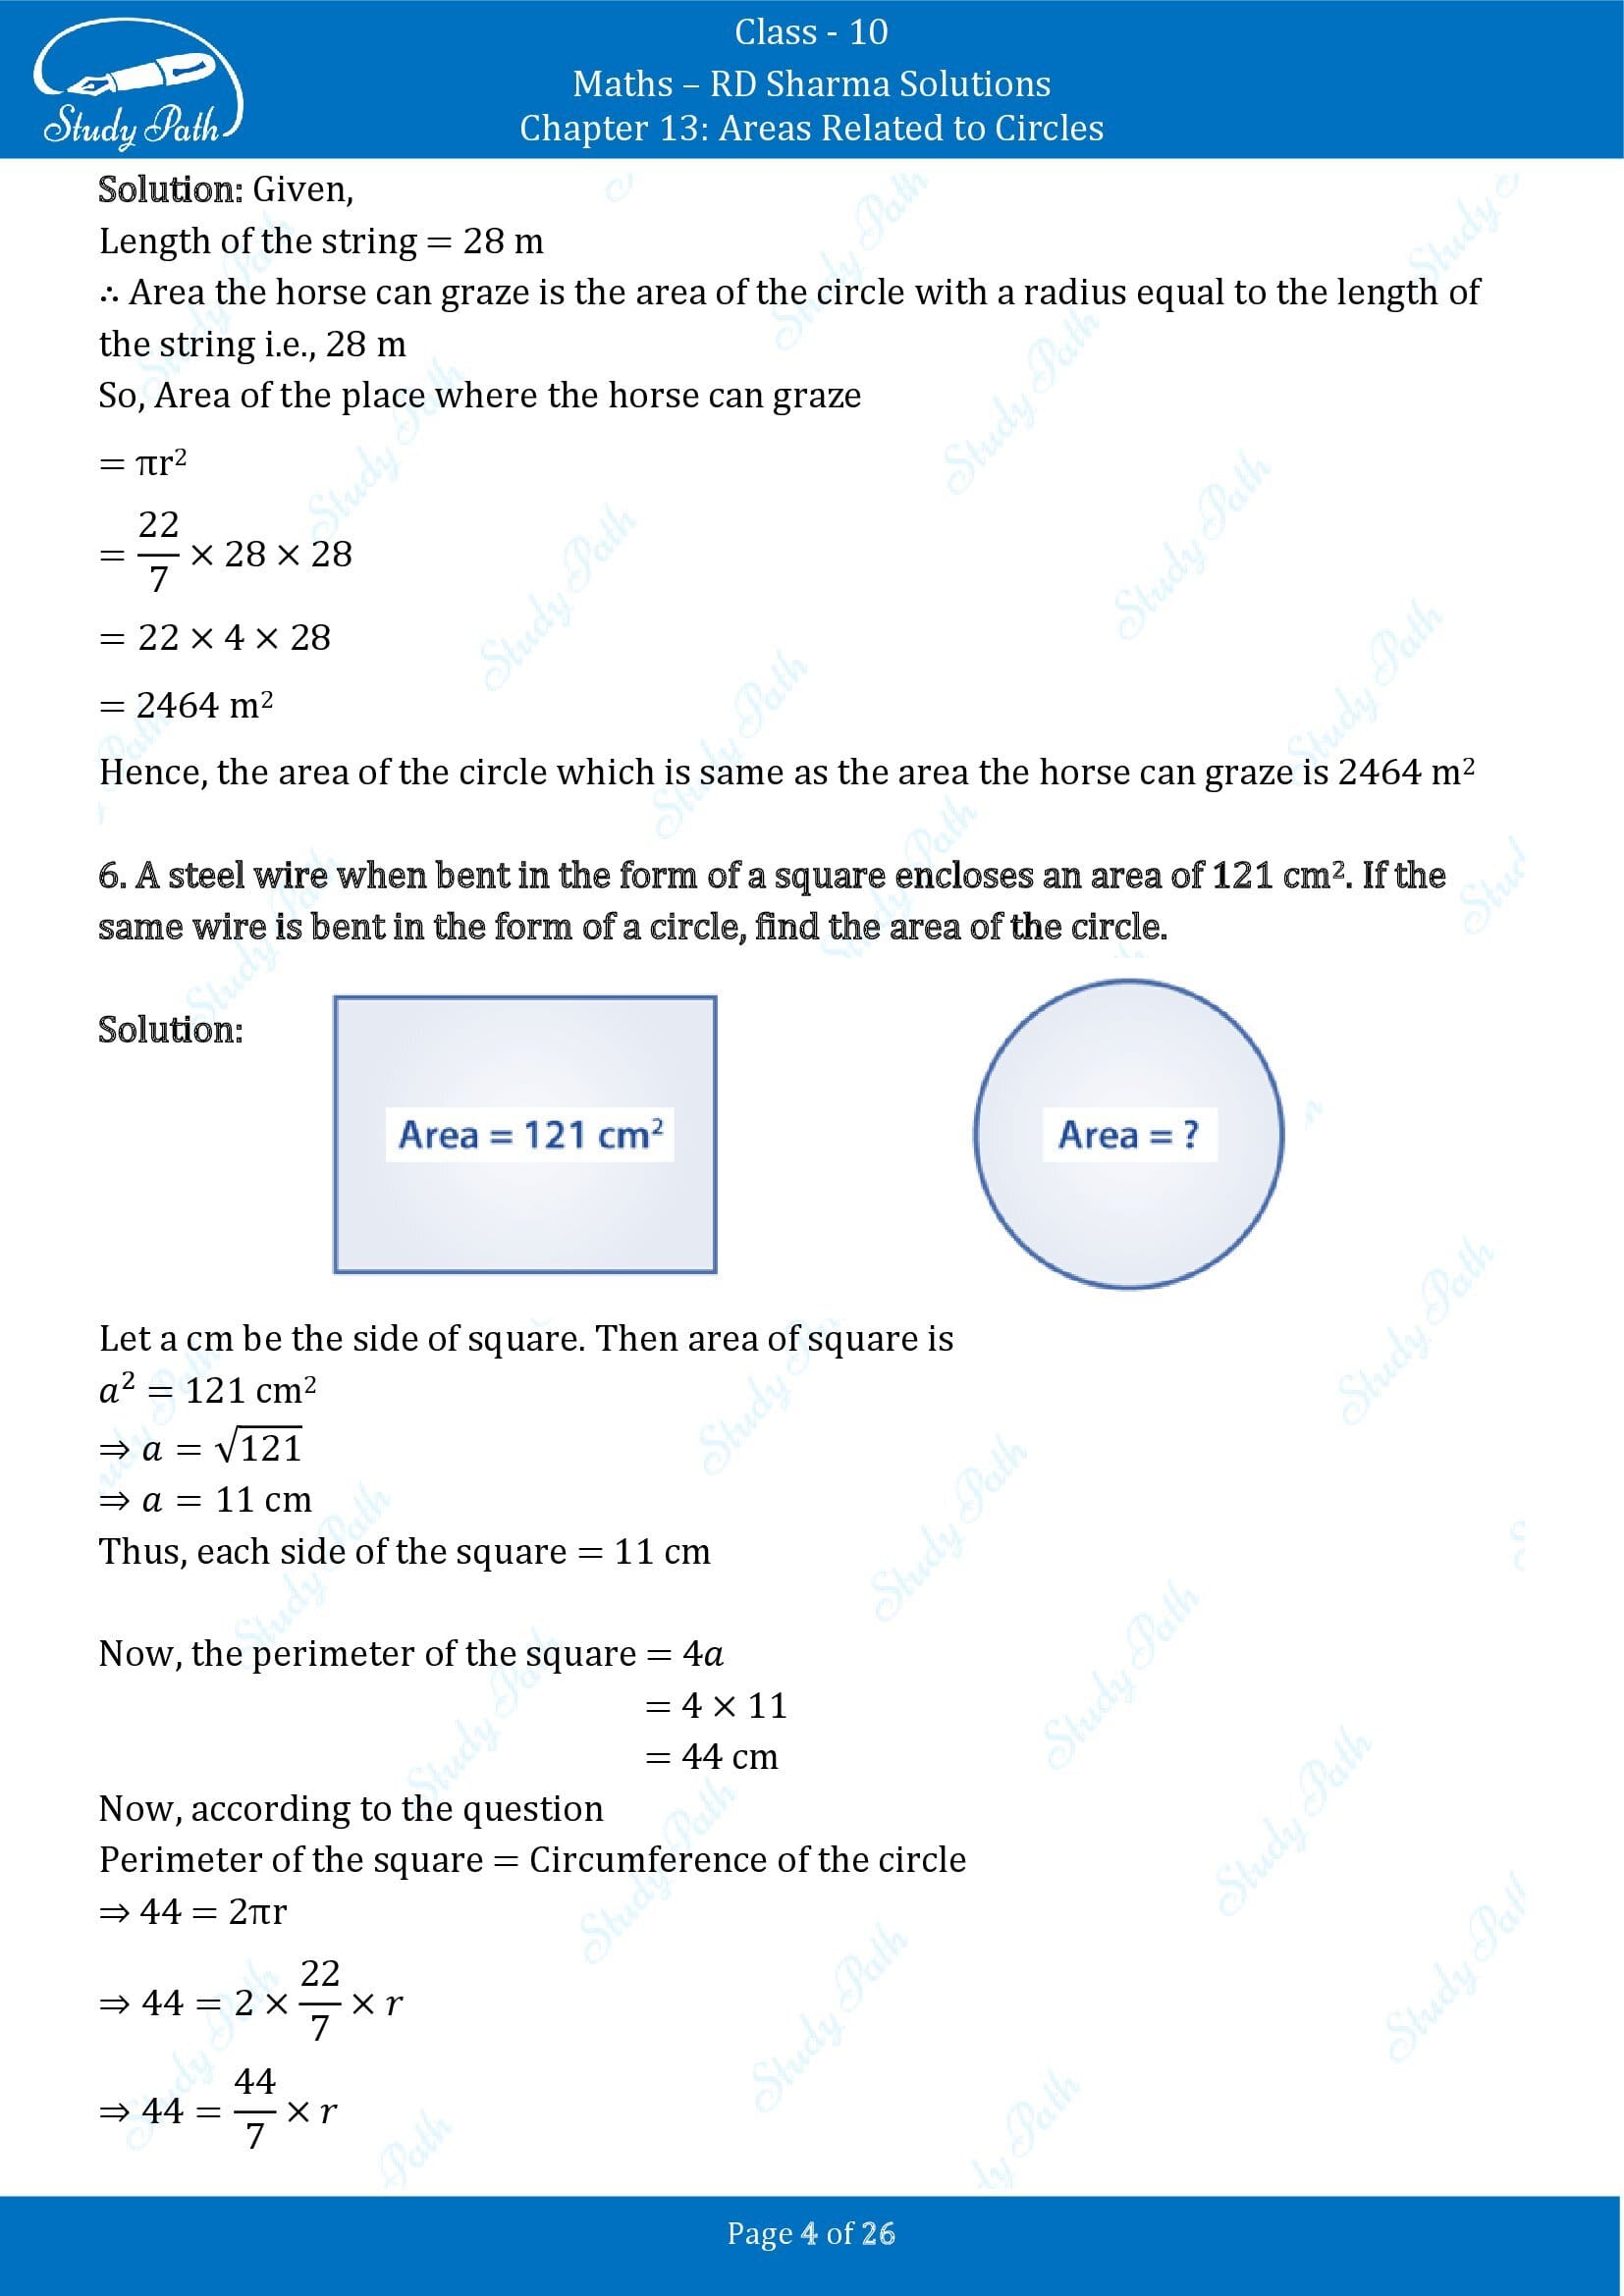 RD Sharma Solutions Class 10 Chapter 13 Areas Related to Circles Exercise 13.1 00004